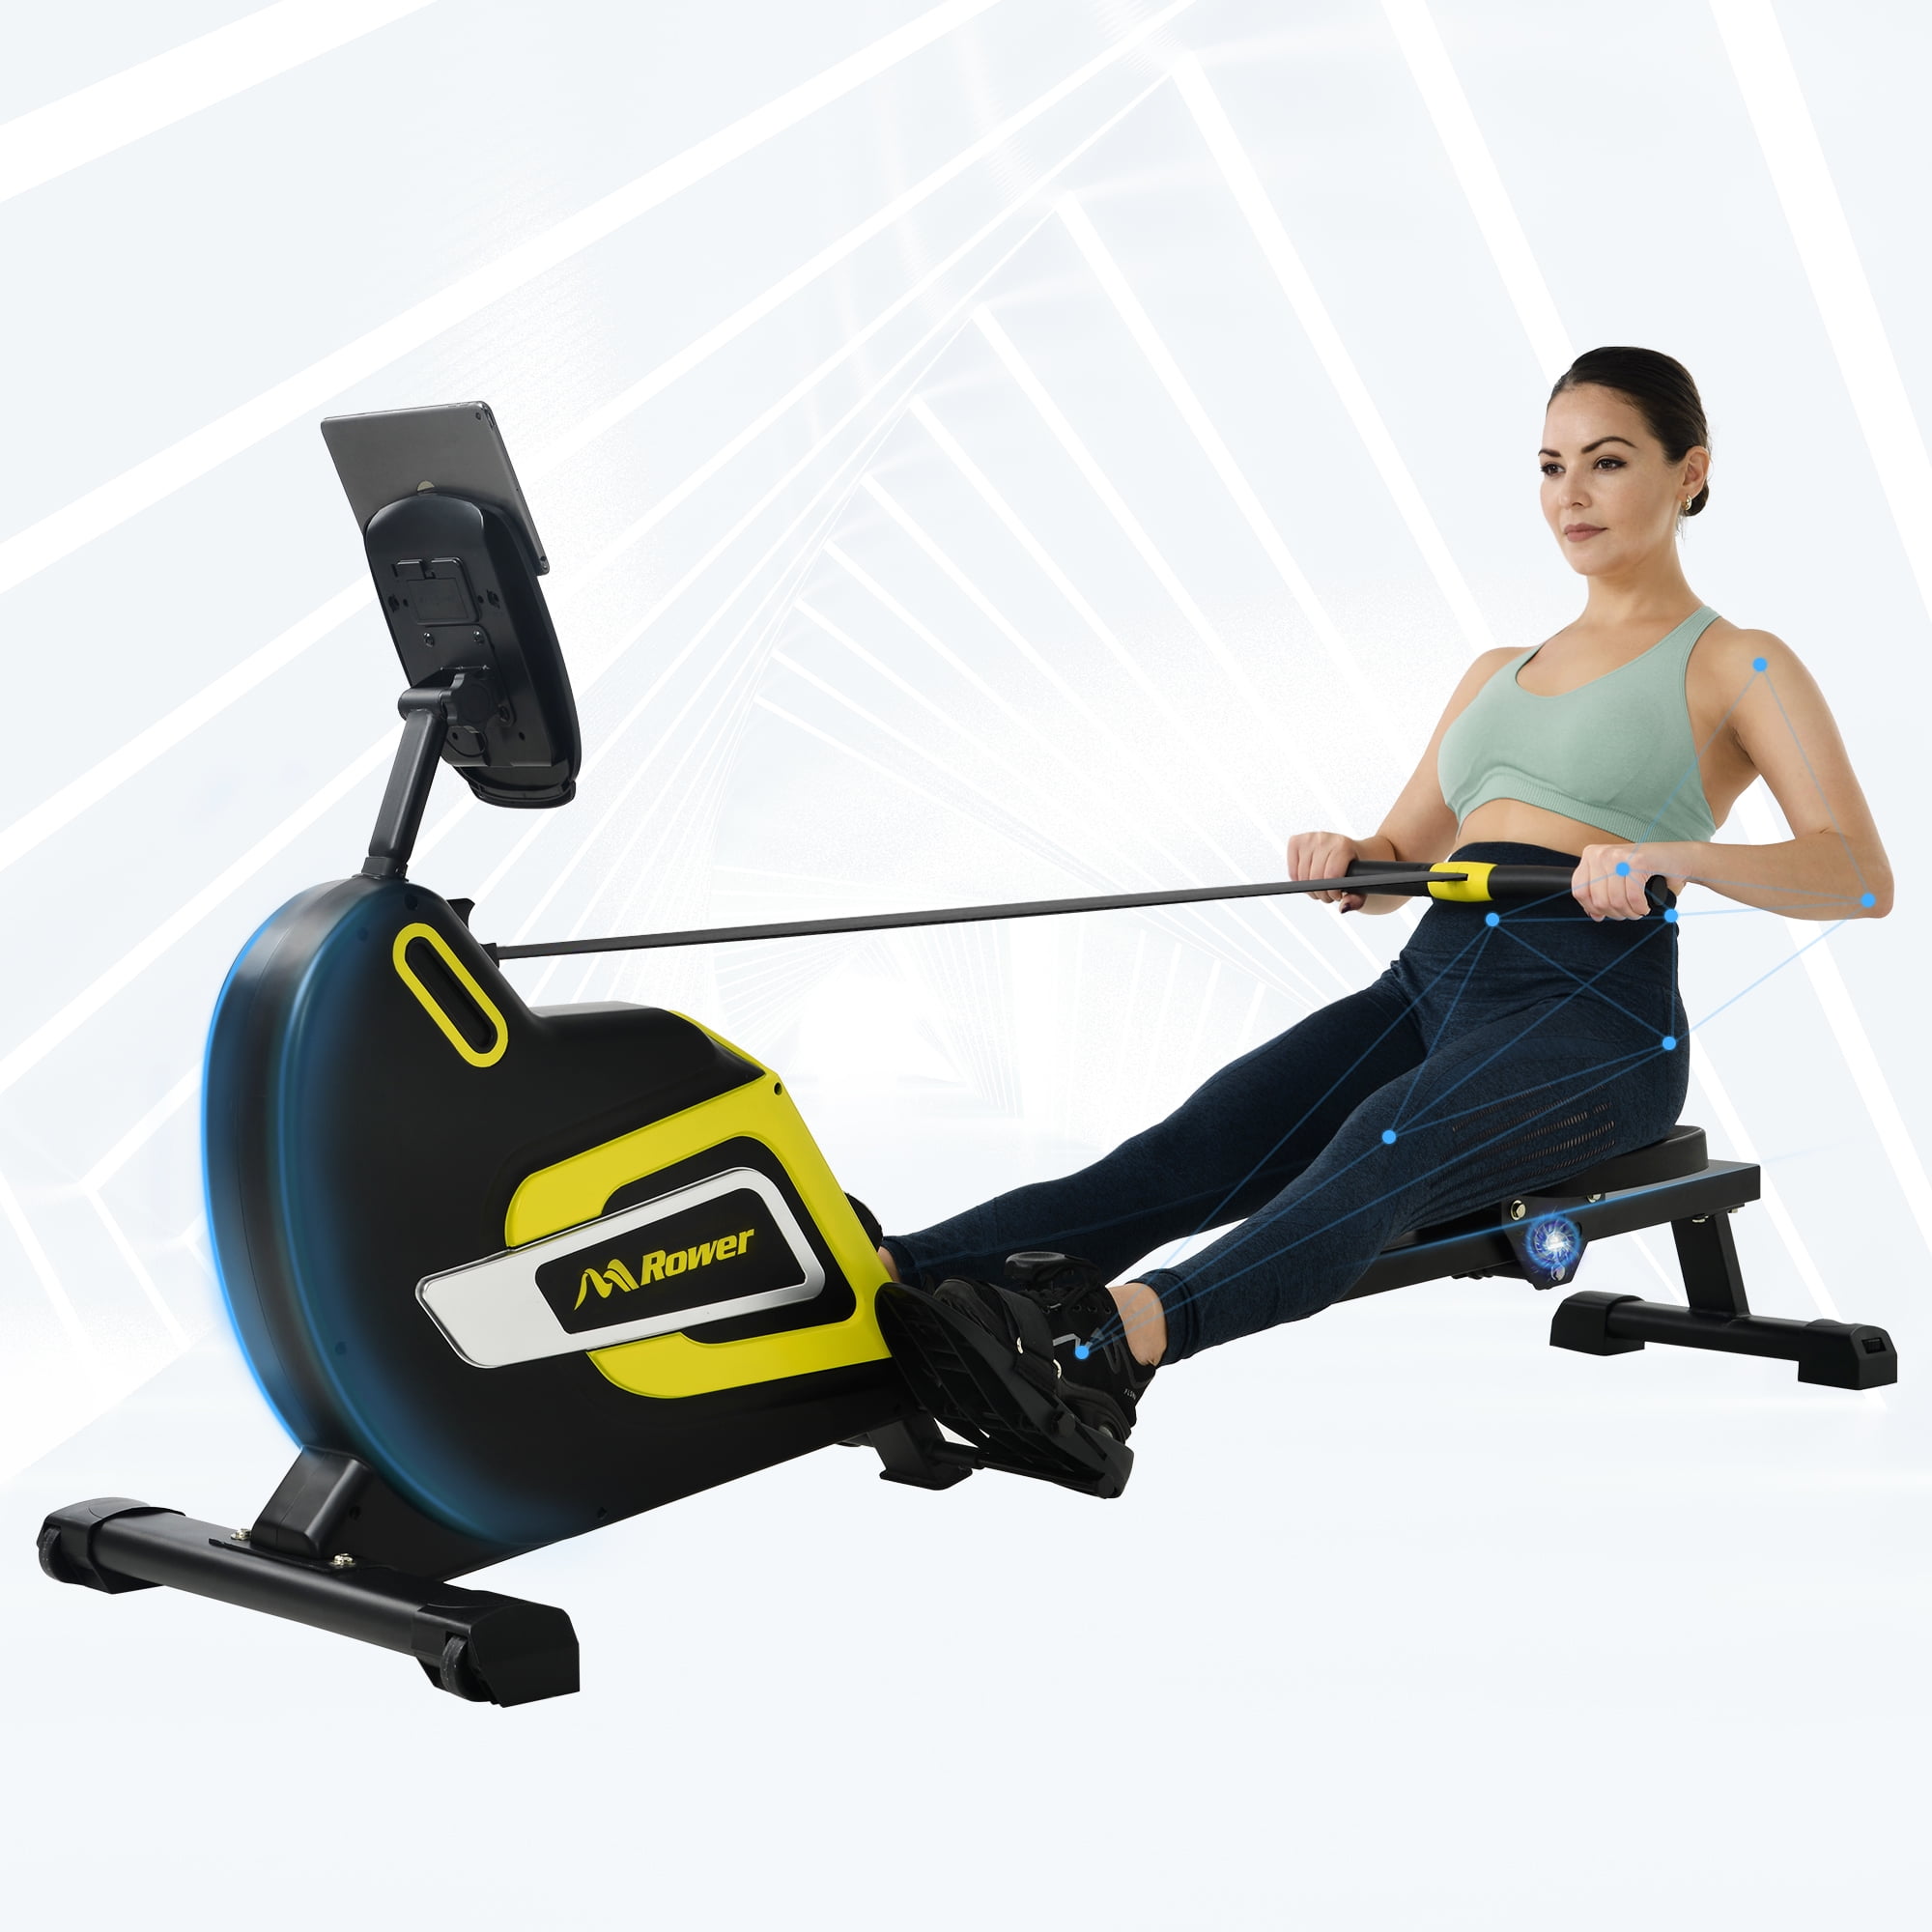 Rowing Machine Rower Home Exercise Equipment Stamina Fitness Cardio Workout Gym 